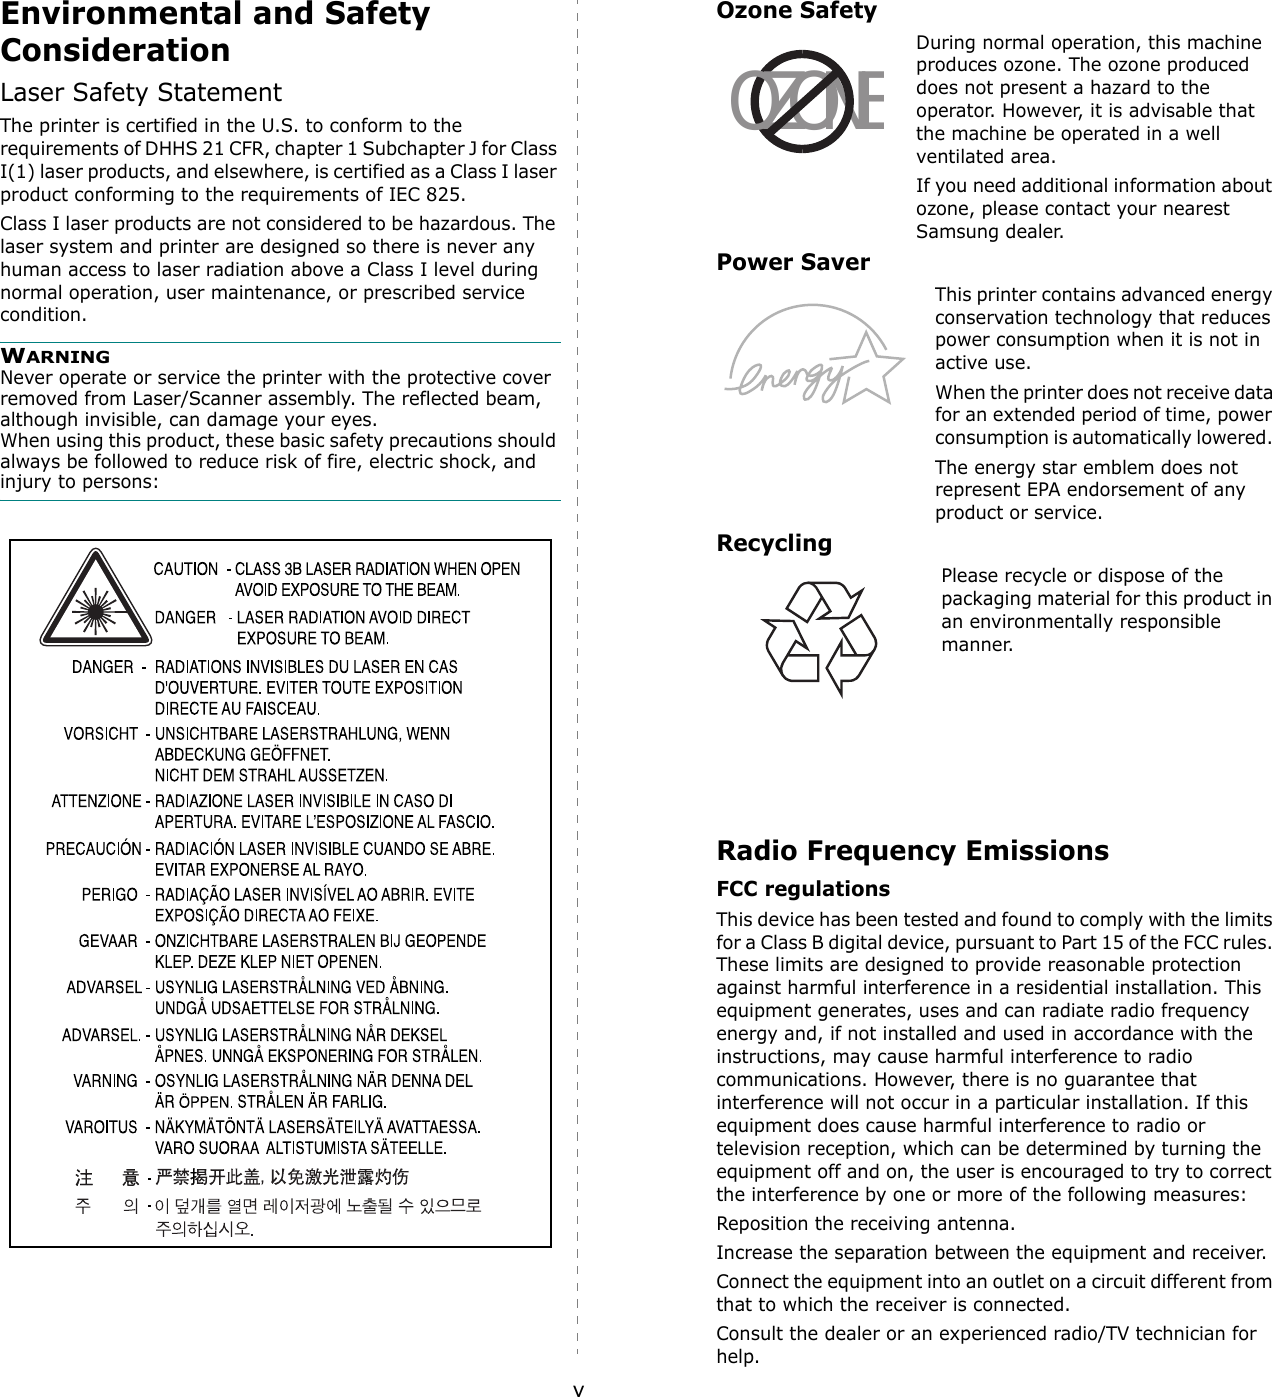 vEnvironmental and Safety ConsiderationLaser Safety StatementThe printer is certified in the U.S. to conform to the requirements of DHHS 21 CFR, chapter 1 Subchapter J for Class I(1) laser products, and elsewhere, is certified as a Class I laser product conforming to the requirements of IEC 825.Class I laser products are not considered to be hazardous. The laser system and printer are designed so there is never any human access to laser radiation above a Class I level during normal operation, user maintenance, or prescribed service condition.WARNING Never operate or service the printer with the protective cover removed from Laser/Scanner assembly. The reflected beam, although invisible, can damage your eyes.When using this product, these basic safety precautions should always be followed to reduce risk of fire, electric shock, and injury to persons: Ozone SafetyDuring normal operation, this machine produces ozone. The ozone produced does not present a hazard to the operator. However, it is advisable that the machine be operated in a well ventilated area.If you need additional information about ozone, please contact your nearest Samsung dealer.Power SaverThis printer contains advanced energy conservation technology that reduces power consumption when it is not in active use.When the printer does not receive data for an extended period of time, power consumption is automatically lowered. The energy star emblem does not represent EPA endorsement of any product or service.RecyclingPlease recycle or dispose of the packaging material for this product in an environmentally responsible manner.Radio Frequency EmissionsFCC regulationsThis device has been tested and found to comply with the limits for a Class B digital device, pursuant to Part 15 of the FCC rules. These limits are designed to provide reasonable protection against harmful interference in a residential installation. This equipment generates, uses and can radiate radio frequency energy and, if not installed and used in accordance with the instructions, may cause harmful interference to radio communications. However, there is no guarantee that interference will not occur in a particular installation. If this equipment does cause harmful interference to radio or television reception, which can be determined by turning the equipment off and on, the user is encouraged to try to correct the interference by one or more of the following measures:Reposition the receiving antenna.Increase the separation between the equipment and receiver.Connect the equipment into an outlet on a circuit different from that to which the receiver is connected.Consult the dealer or an experienced radio/TV technician for help.OZONE